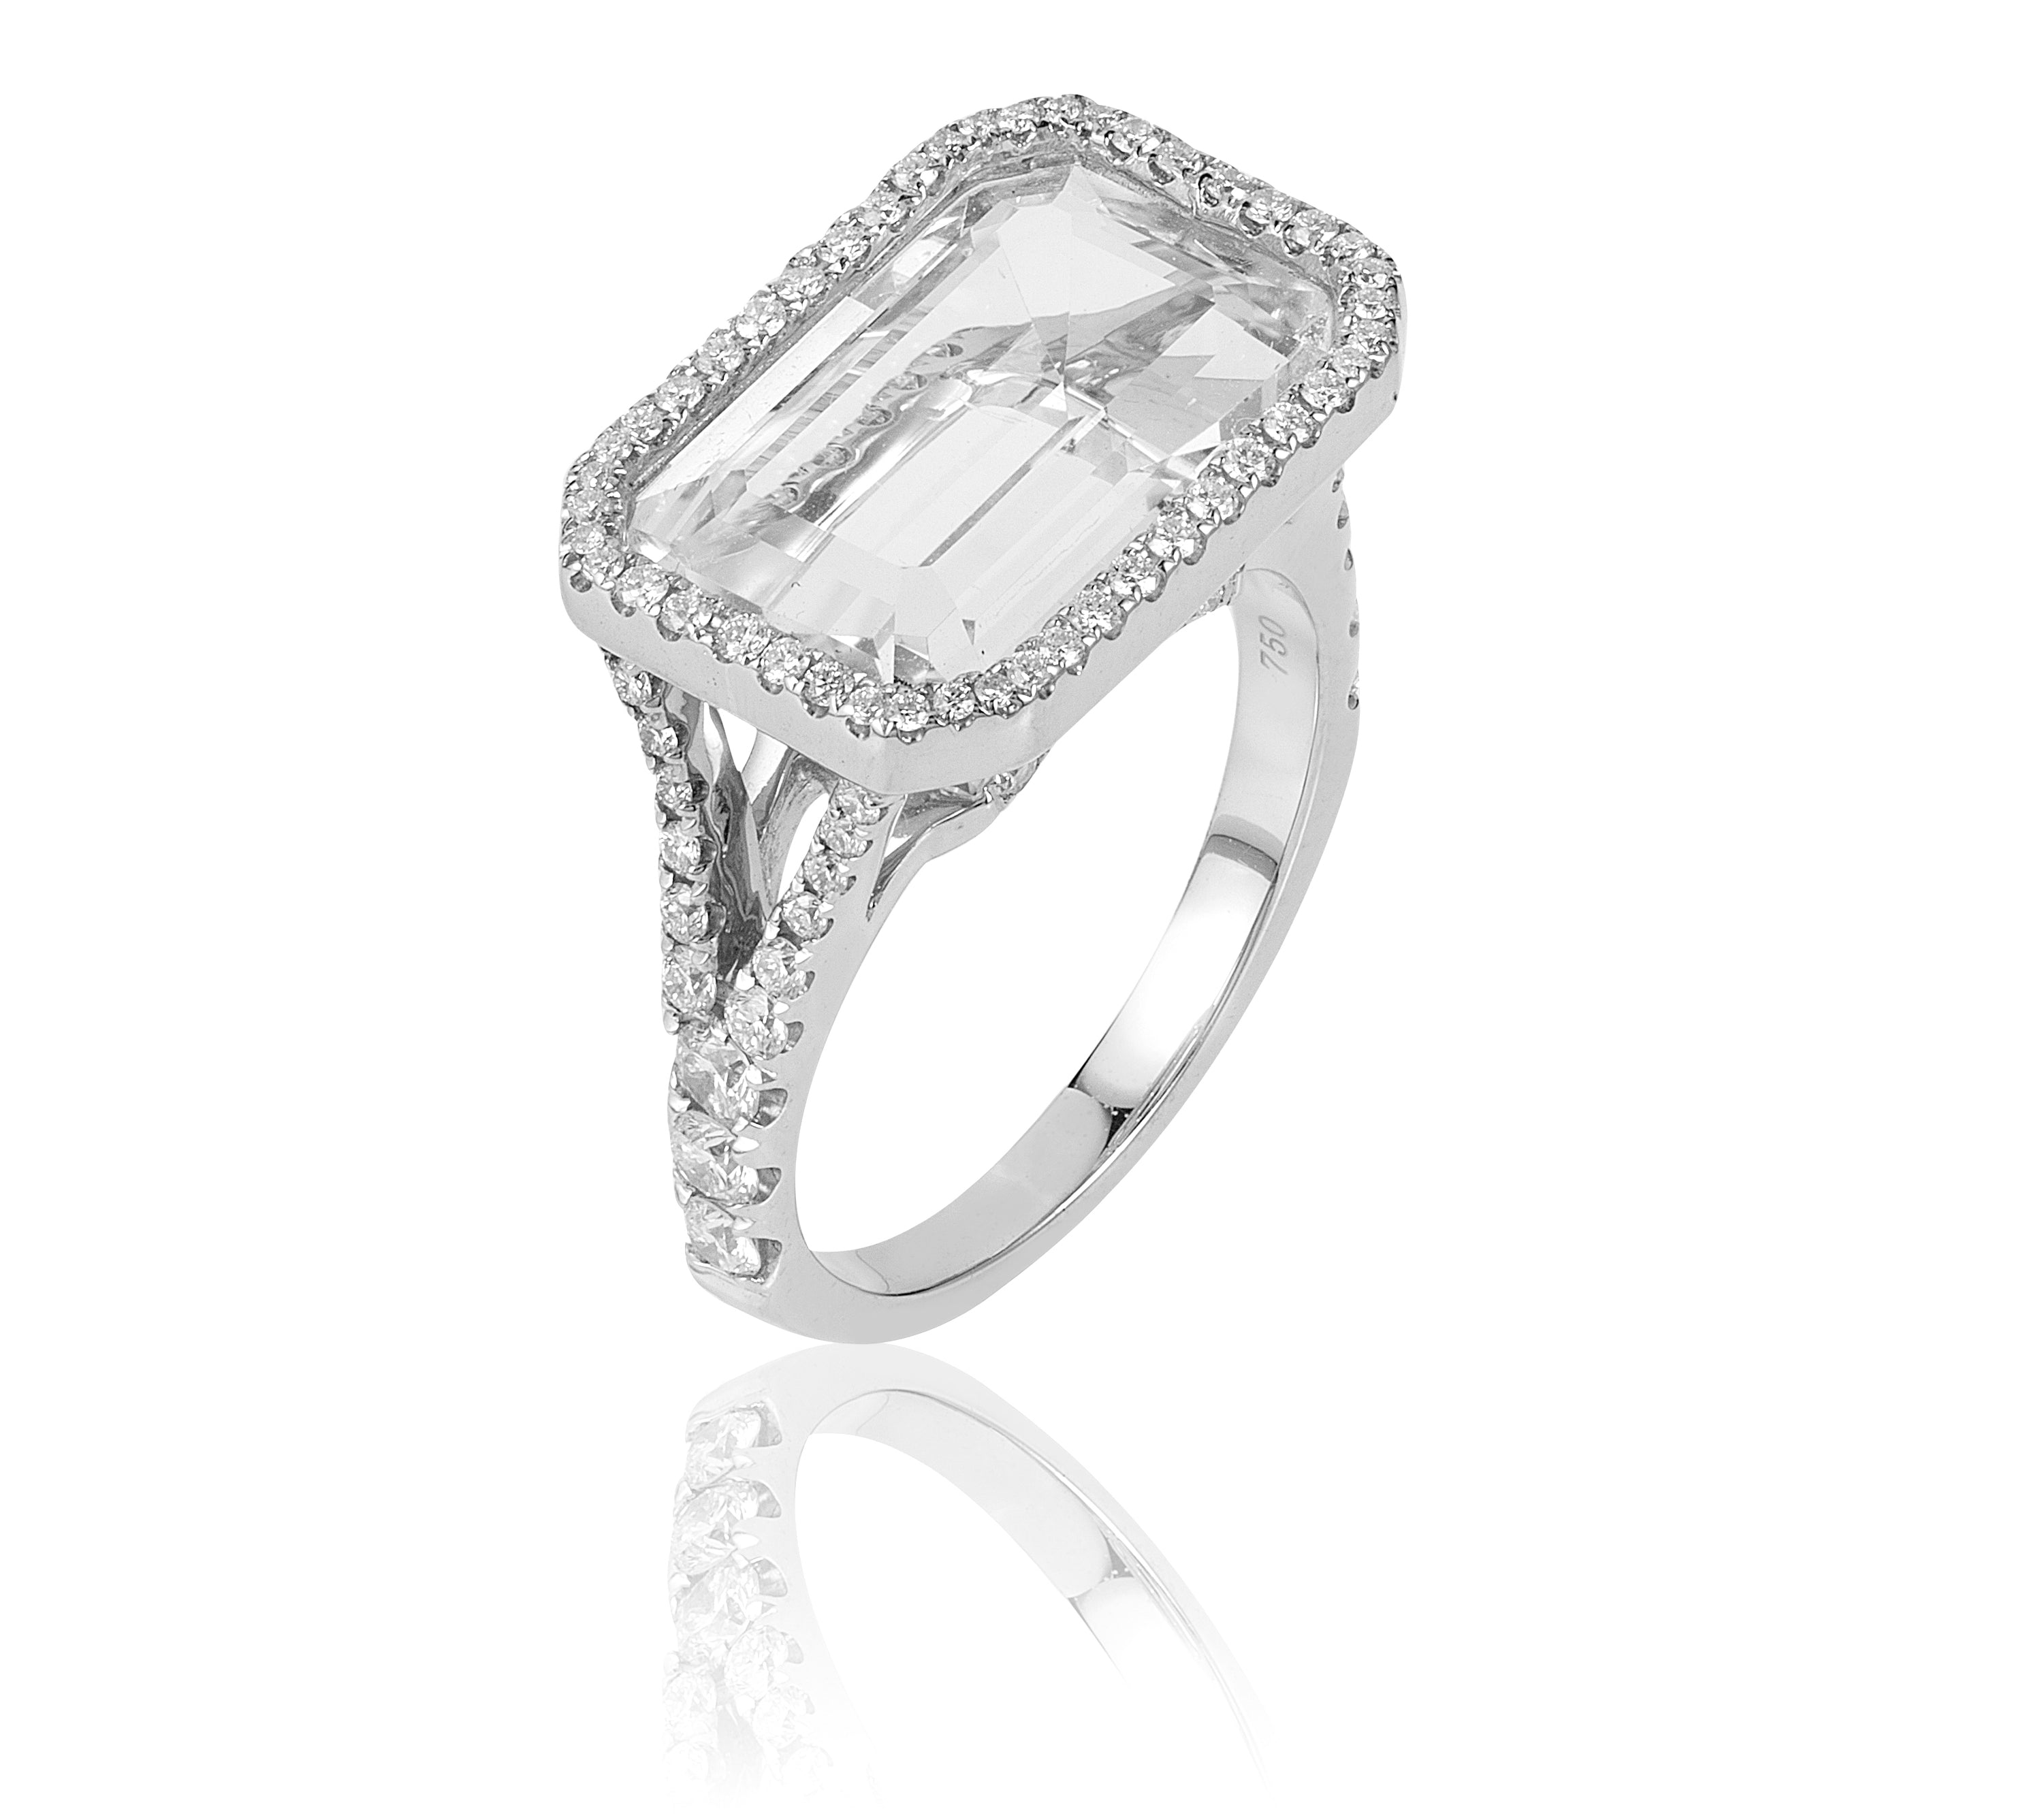 Rock Crystal East-West Emerald Cut Ring With Diamonds Cocktail Goshwara   